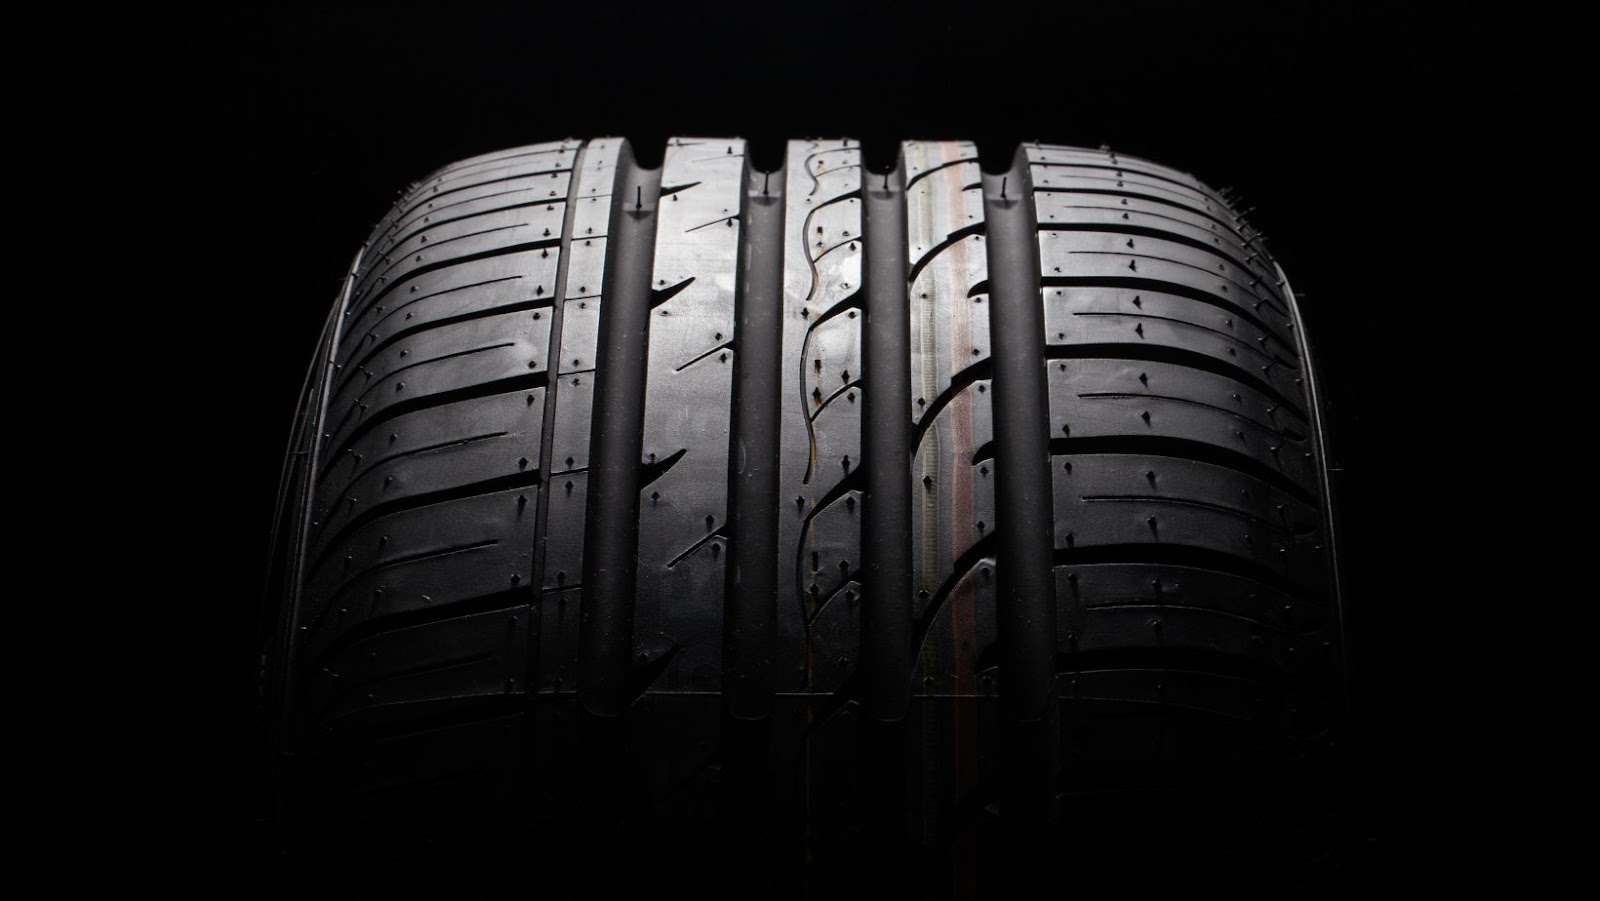 The Outstanding Performance of the 285/70r17 Federal Couragia Mt Off-Road Tire